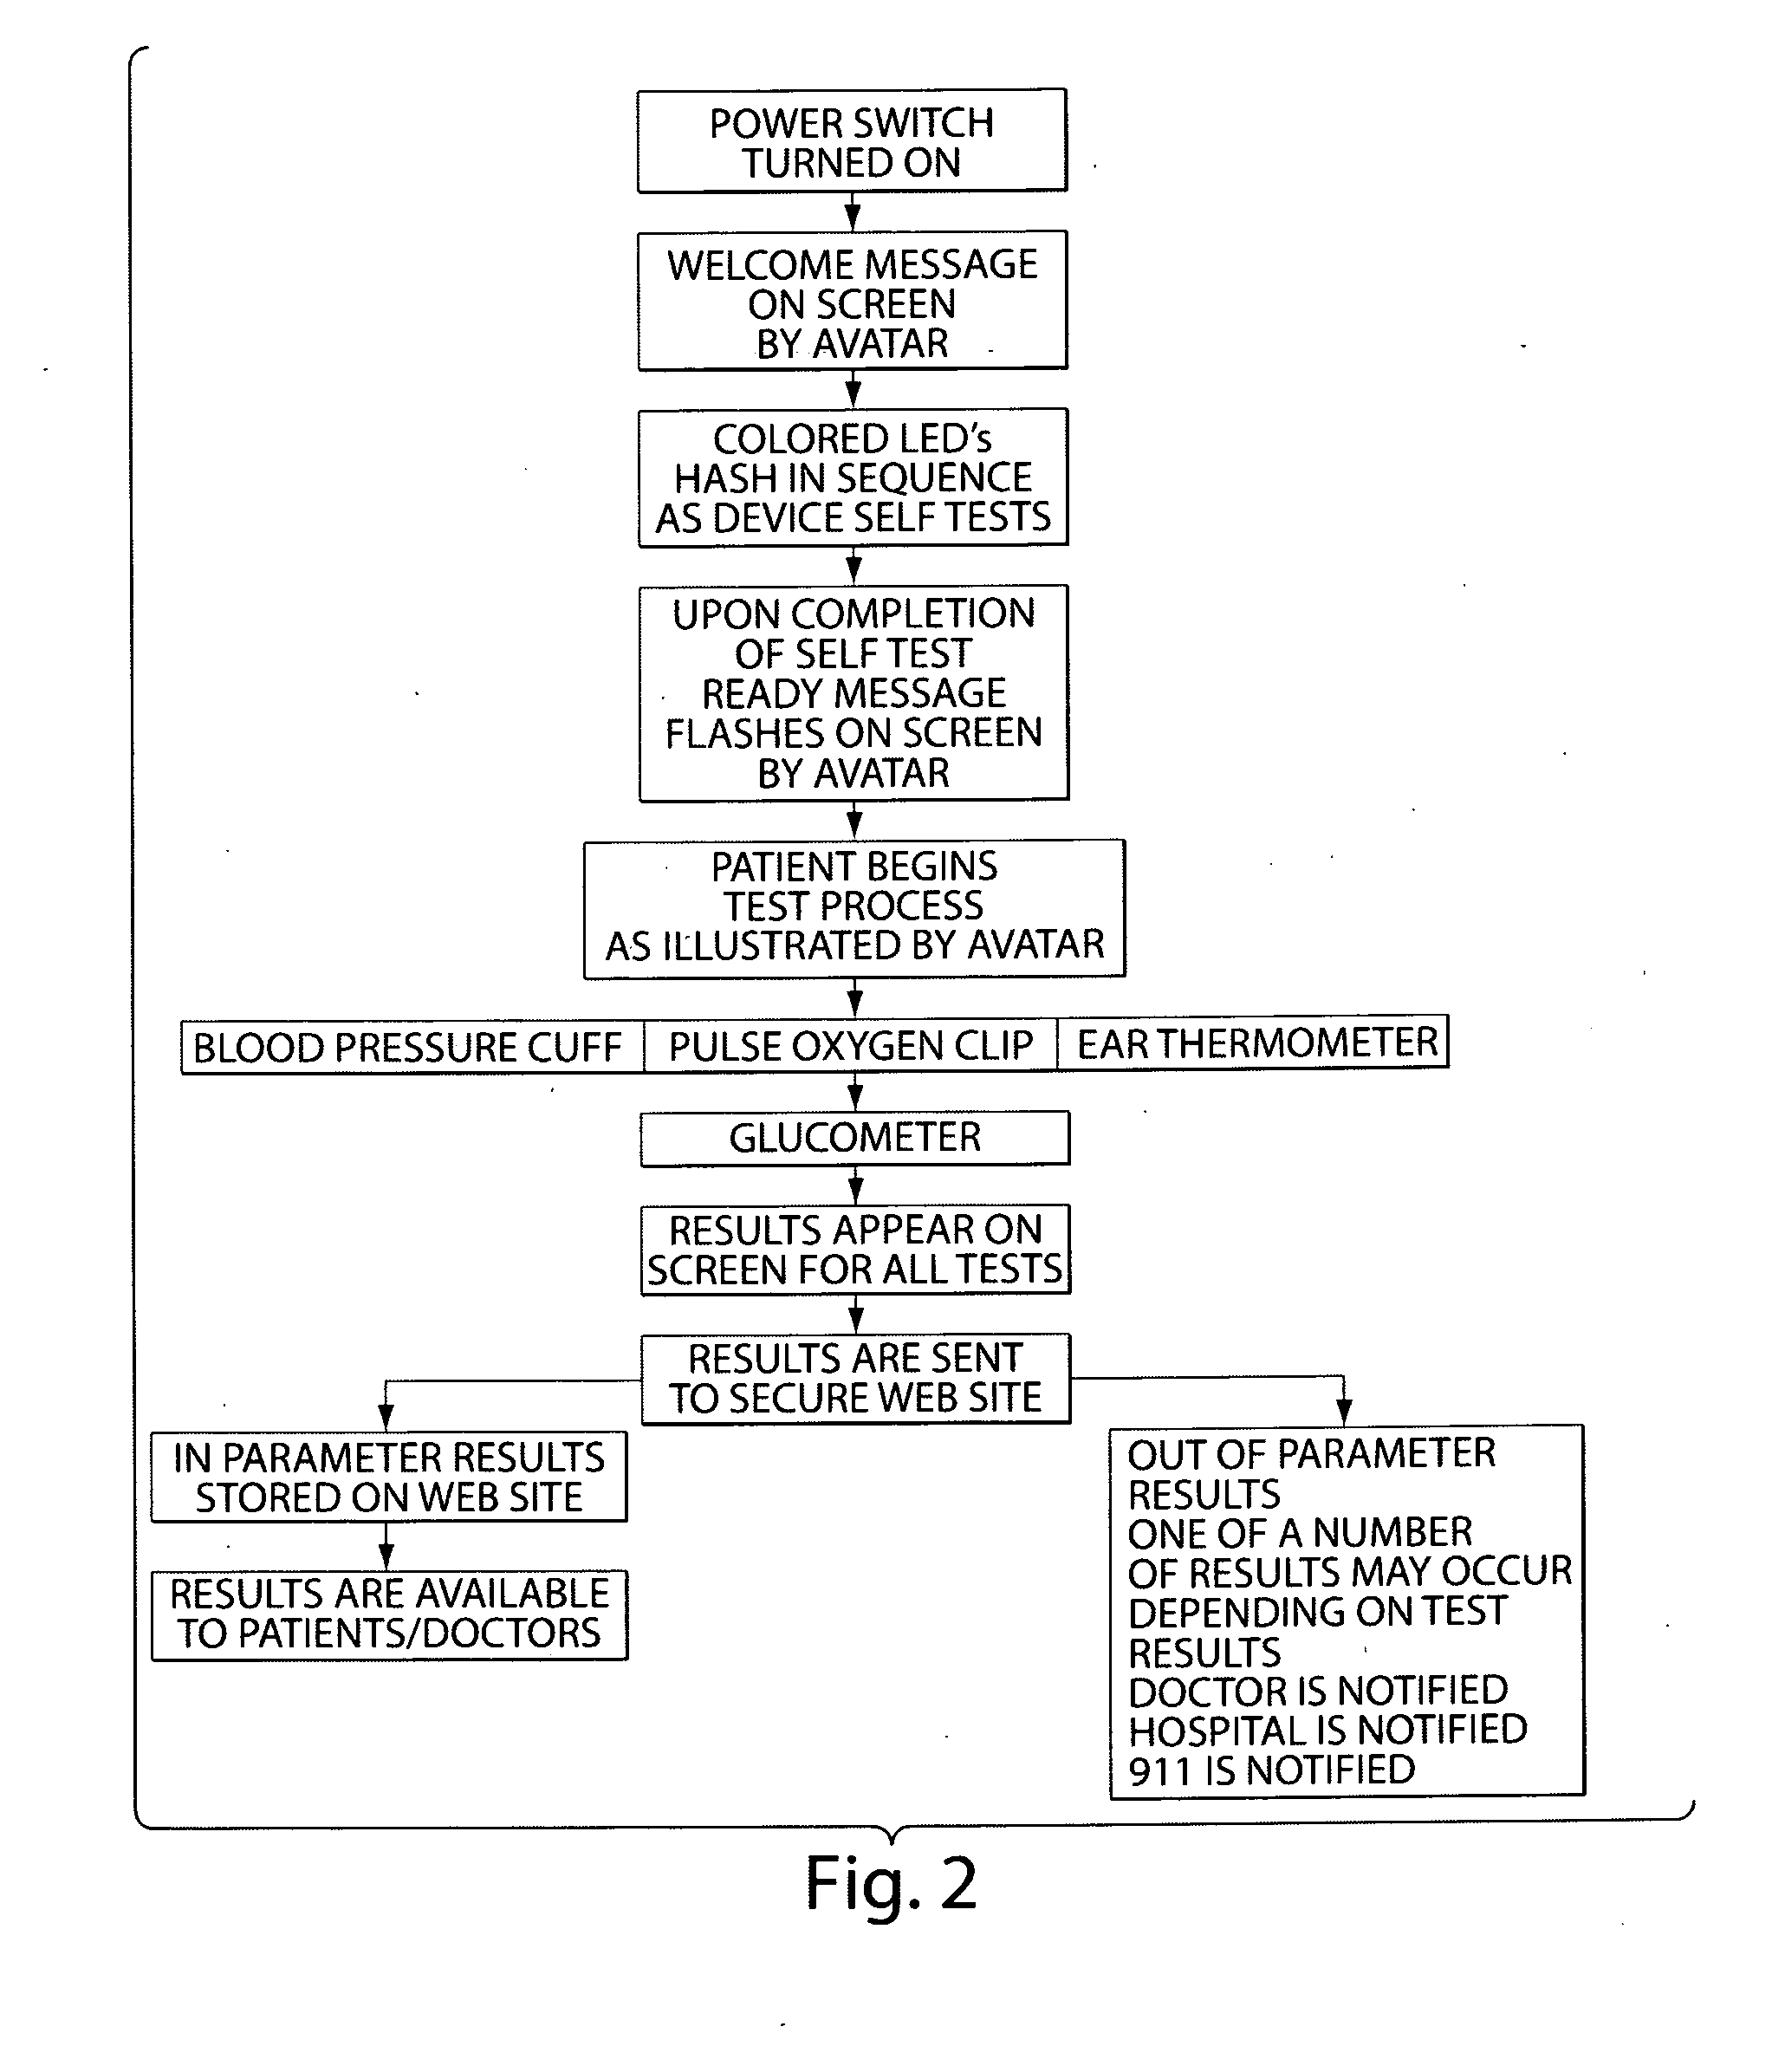 Patient healthcare monitoring/maintenance system